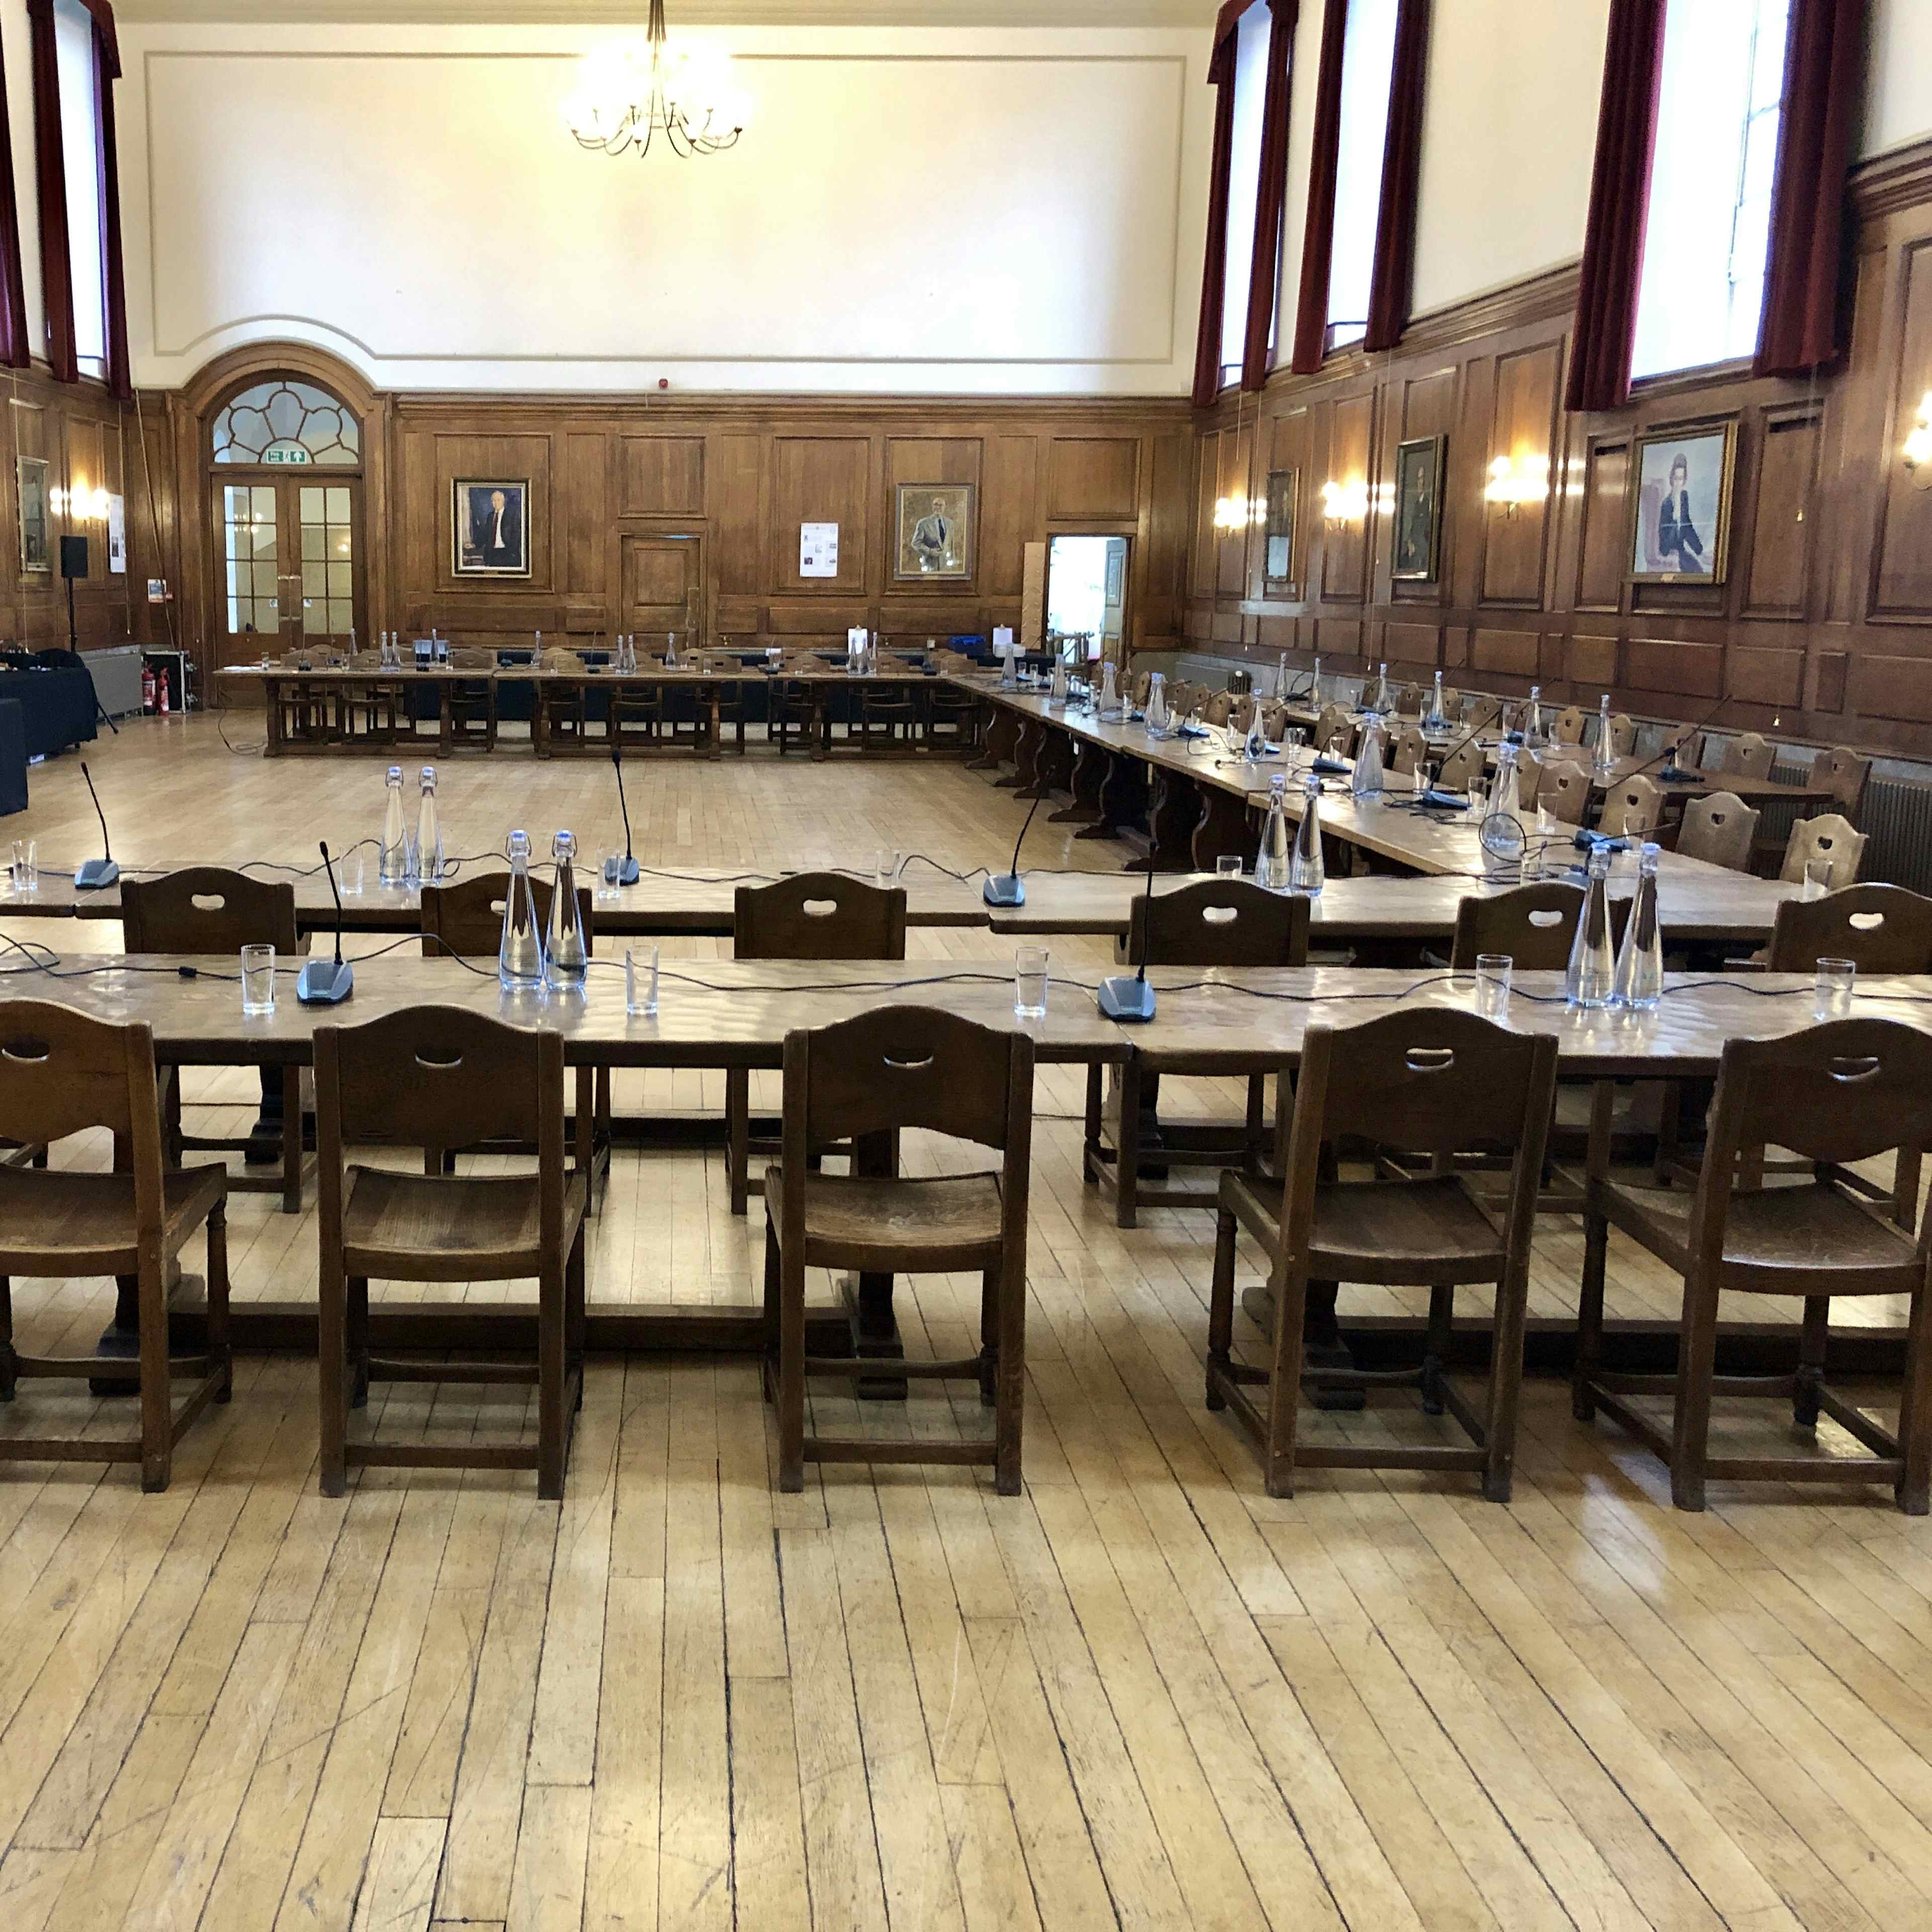 Goodenough College Events & Venue Hire - The Great Hall image 3